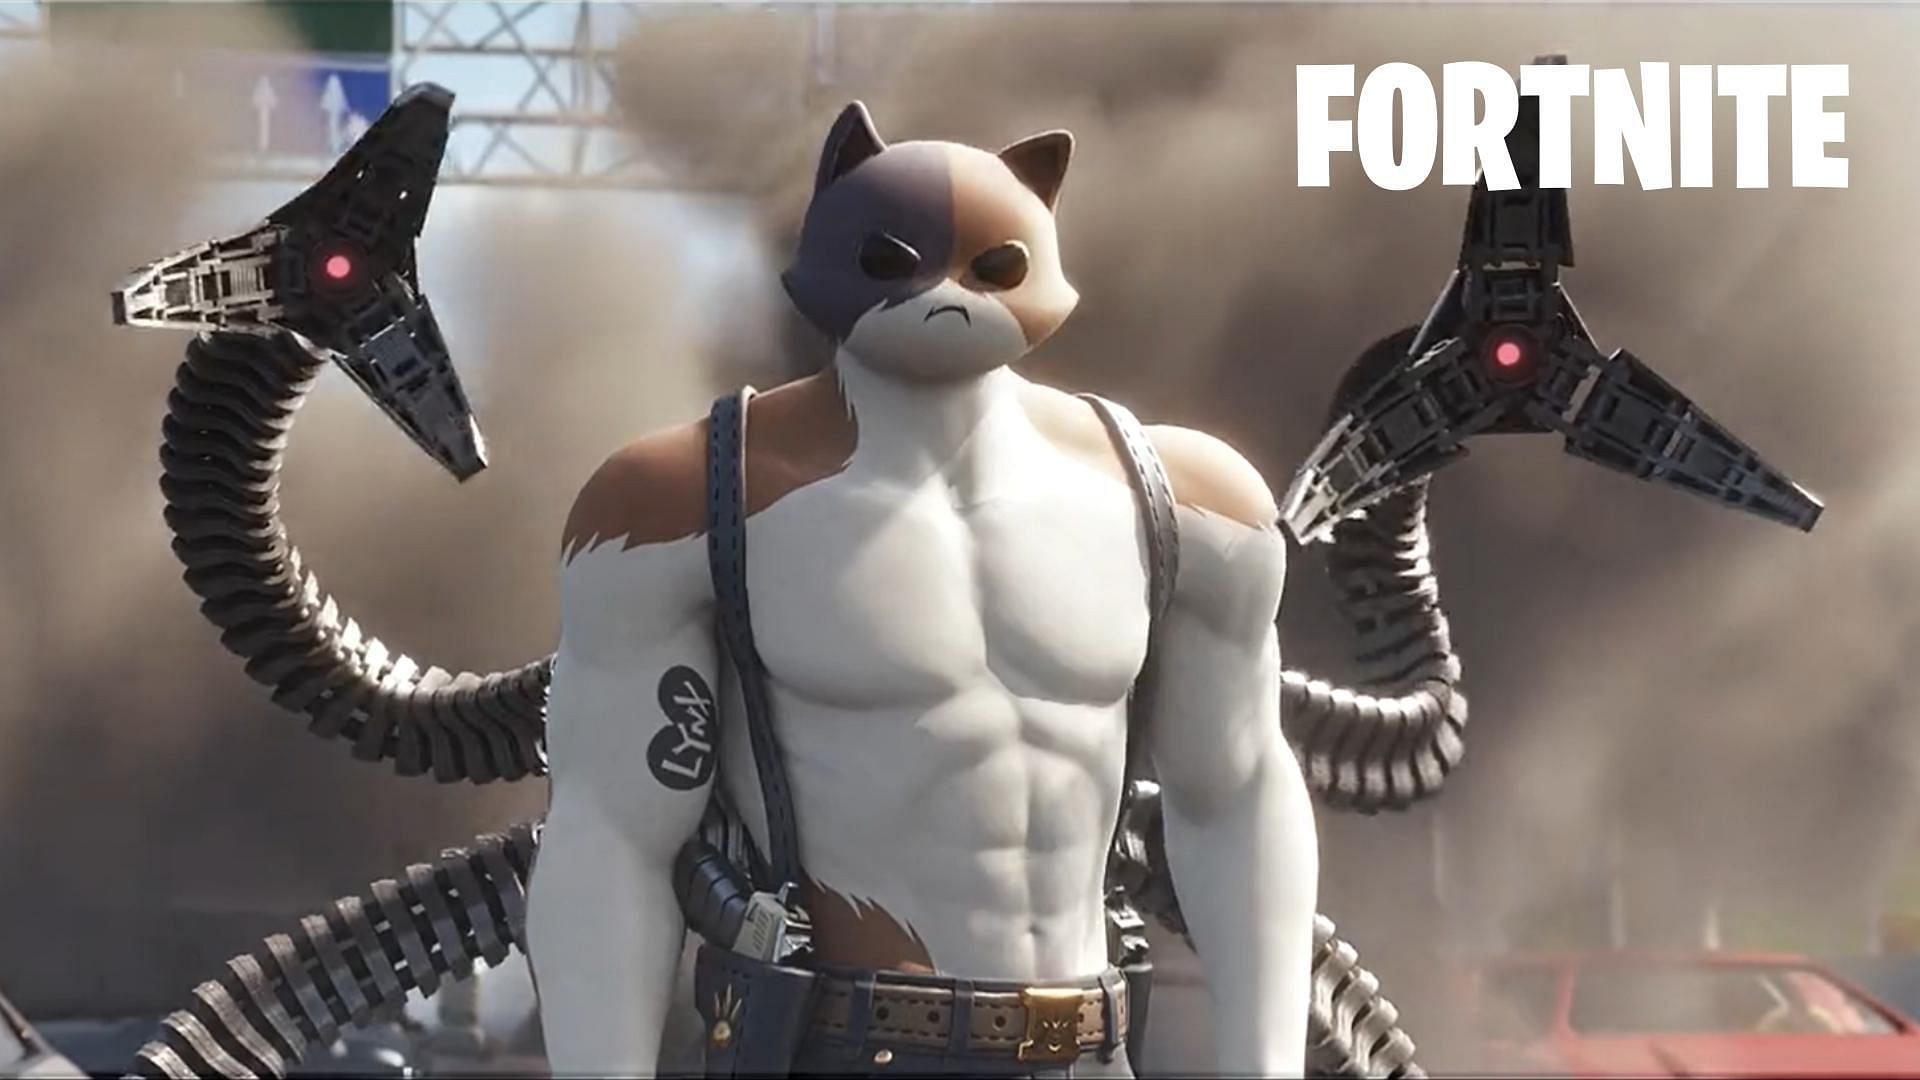 Players created a concept showing Doc Ock&#039;s arms on Meowscles from Fortnite (Image via Twitter/Feraalsy)